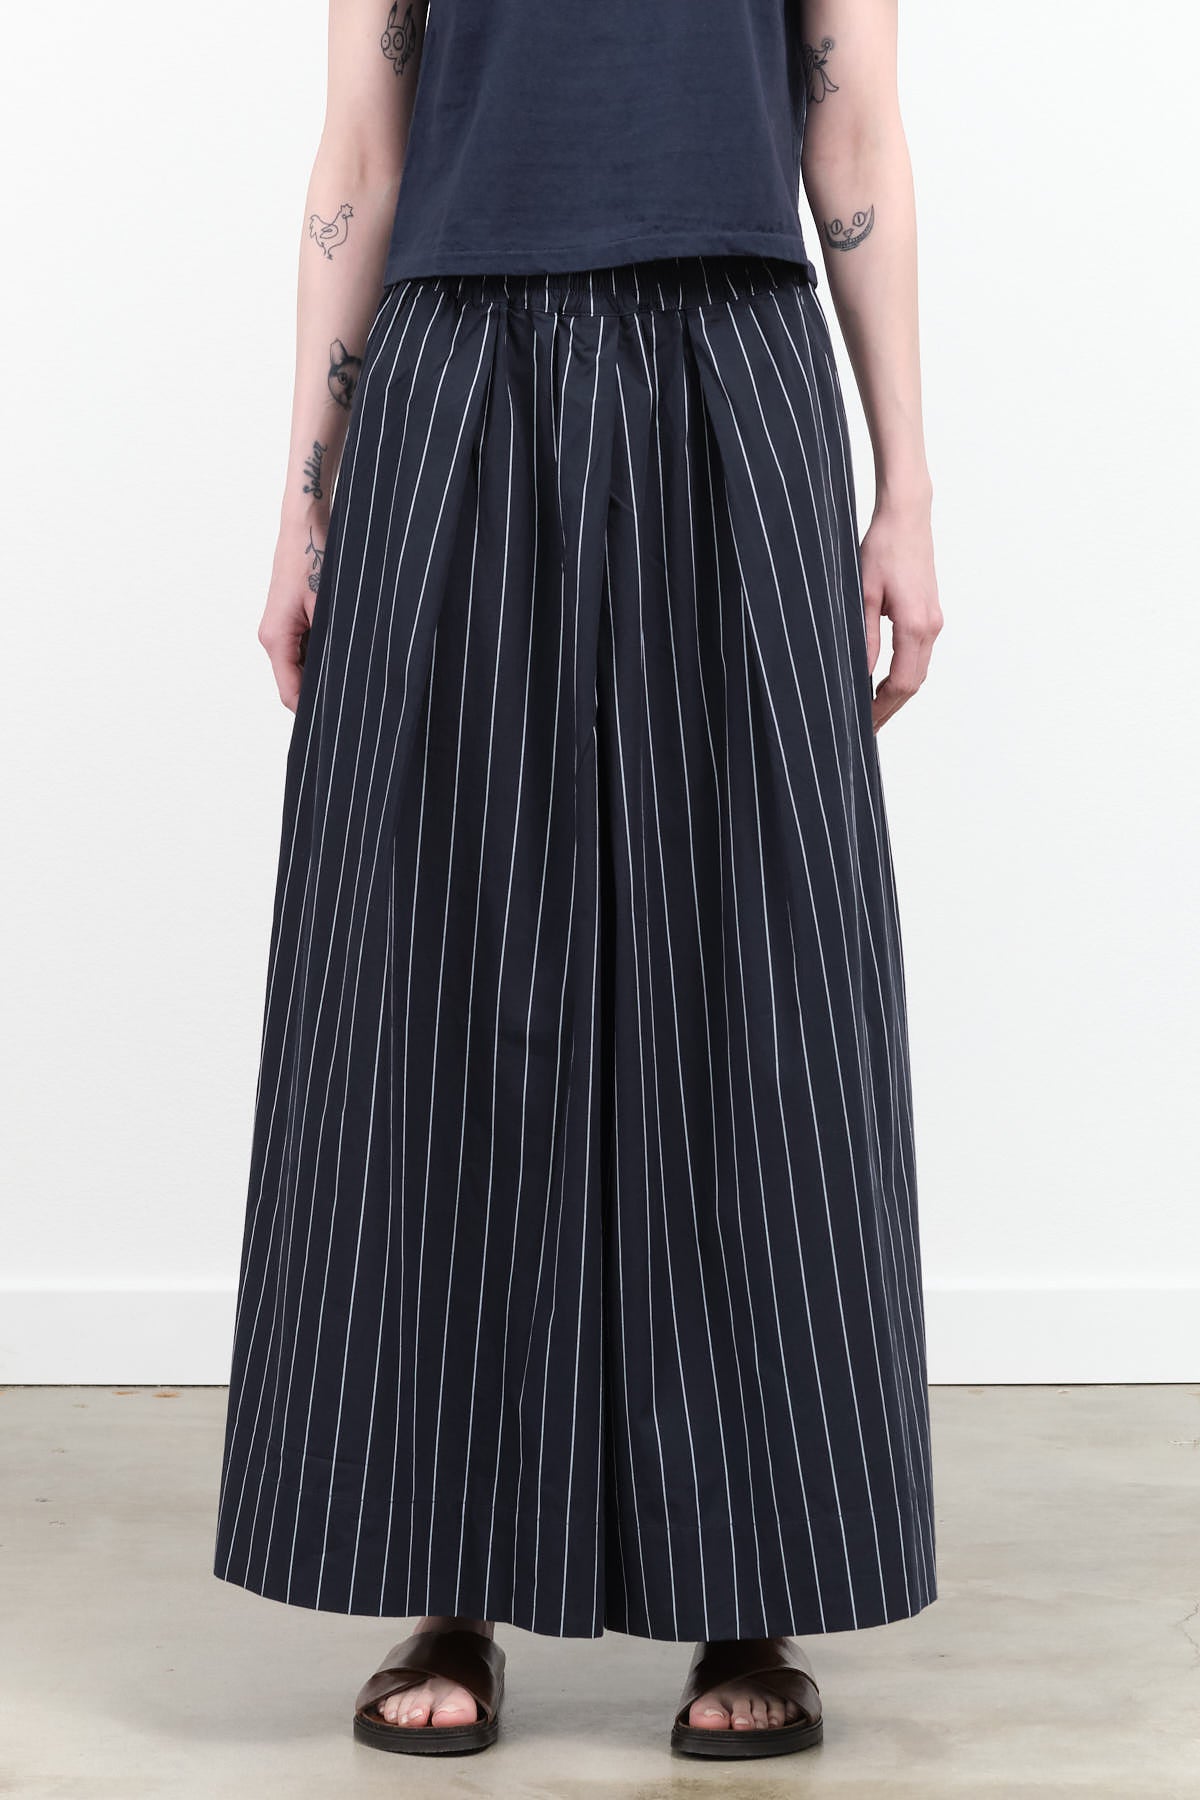 Athena Pant by Kowtow in Navy Pinstripe